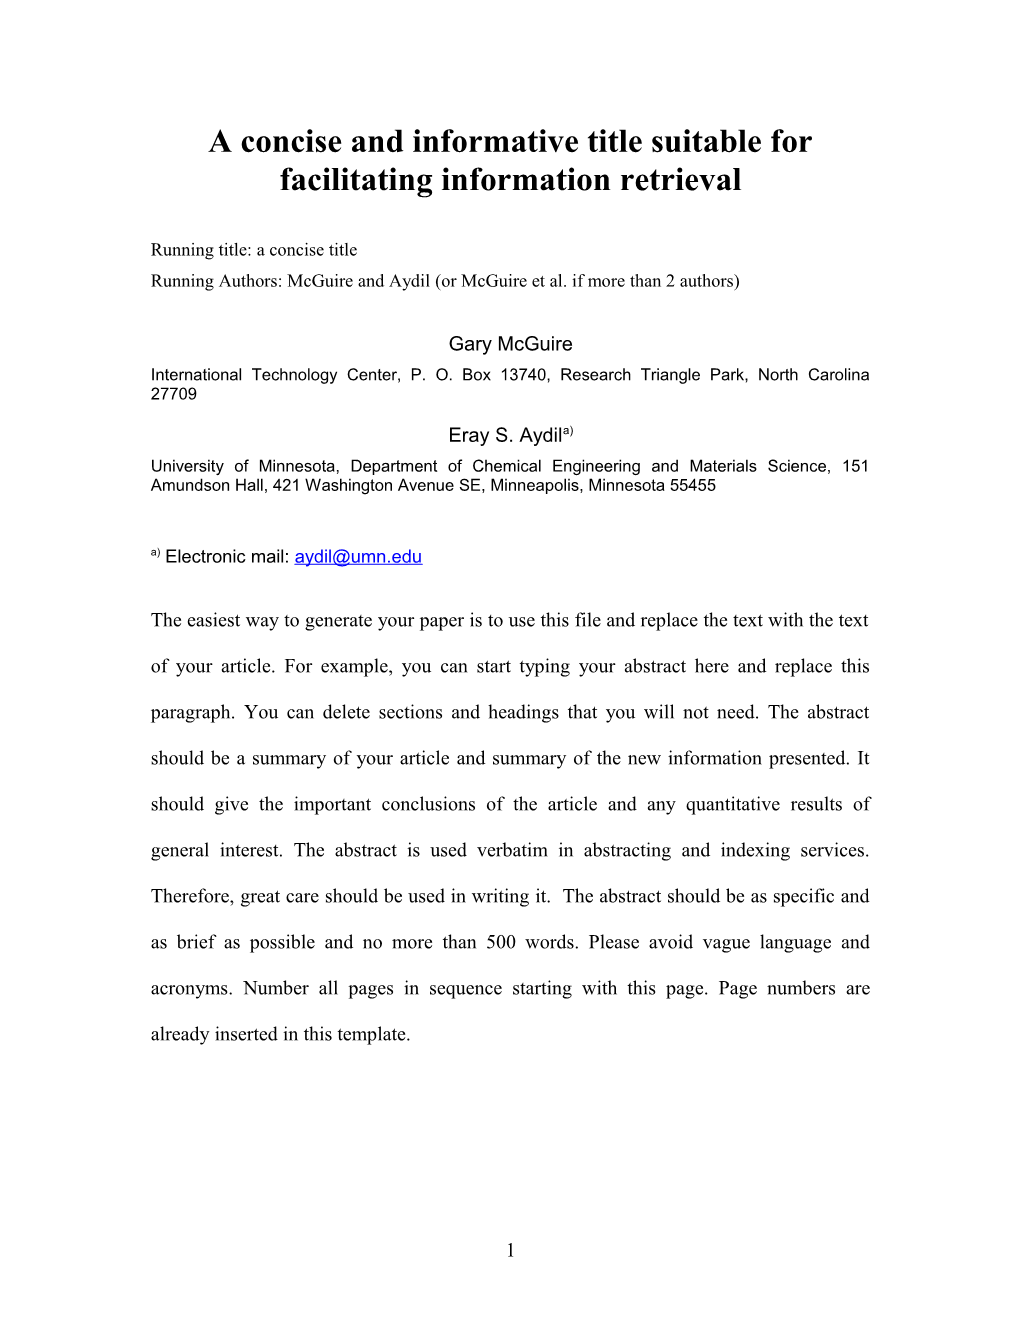 A Concise and Informative Title Suitable for Facilitating Information Retrieval